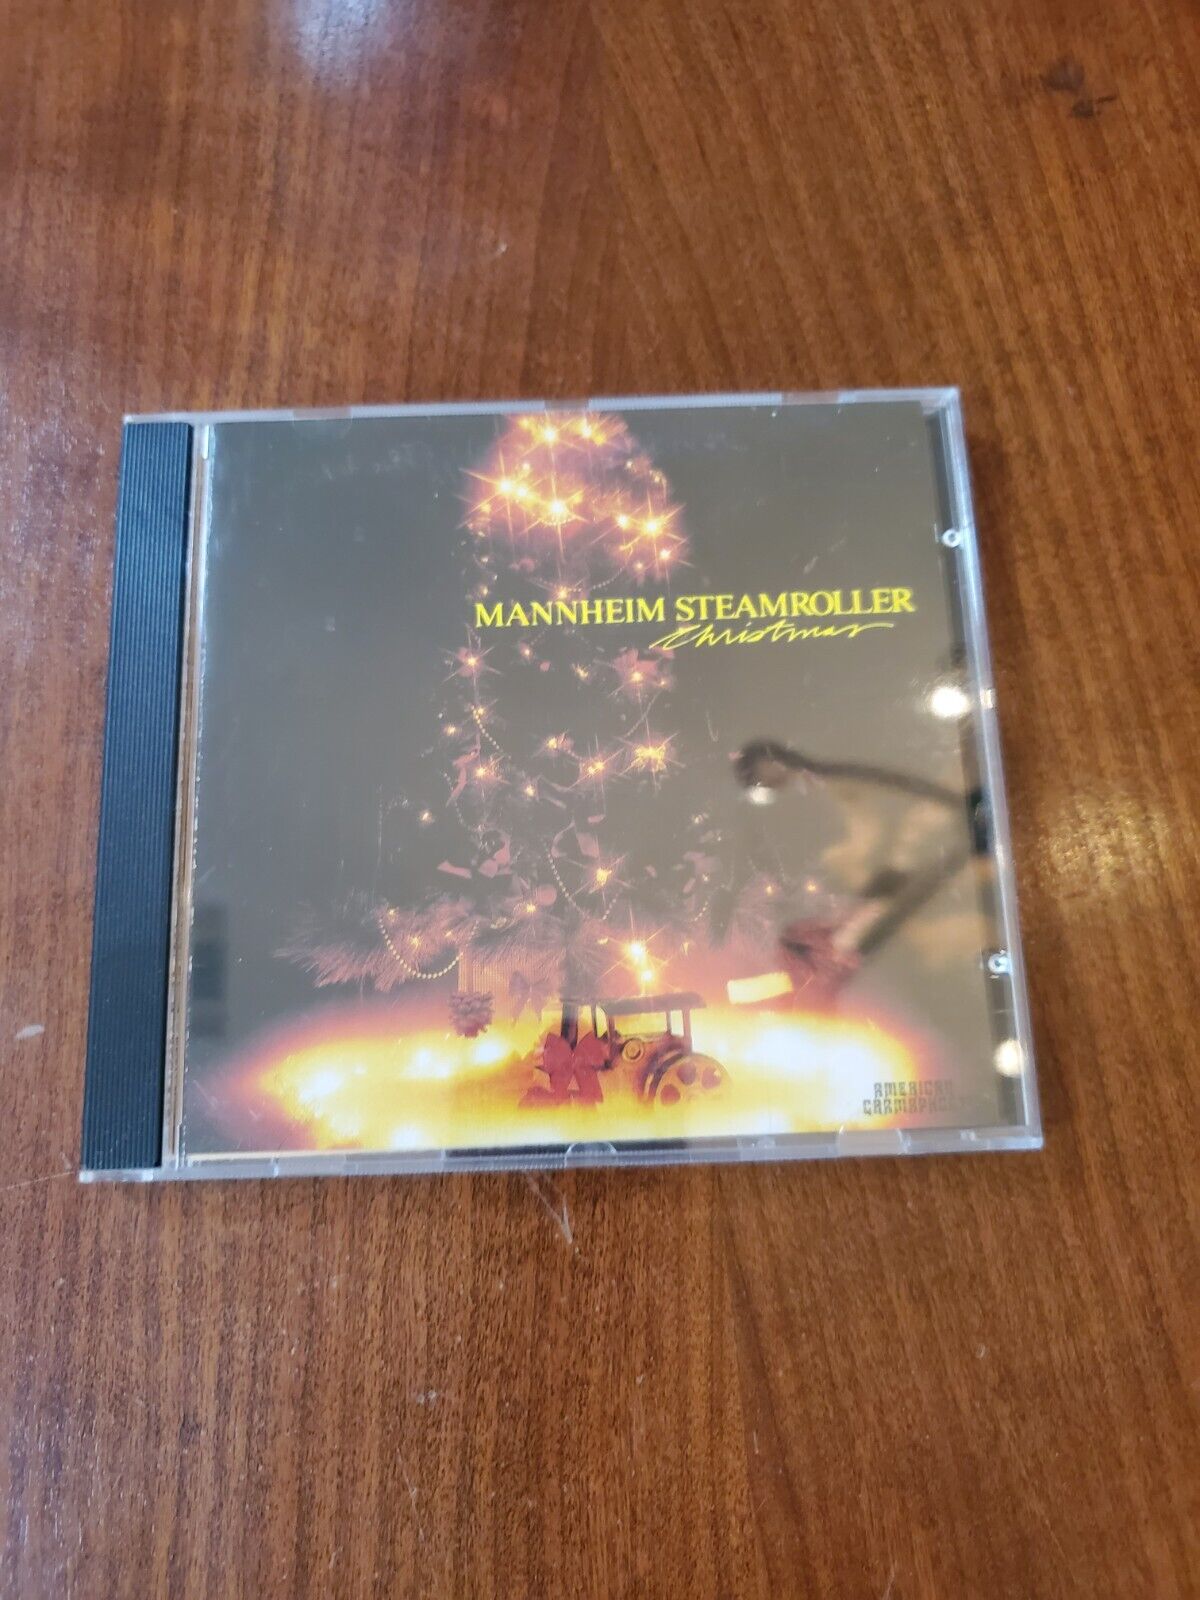 MANNHEIM STEAMROLLER CHRISTMAS CD 1984 POP ACOUSTIC COMPILATION AG Records